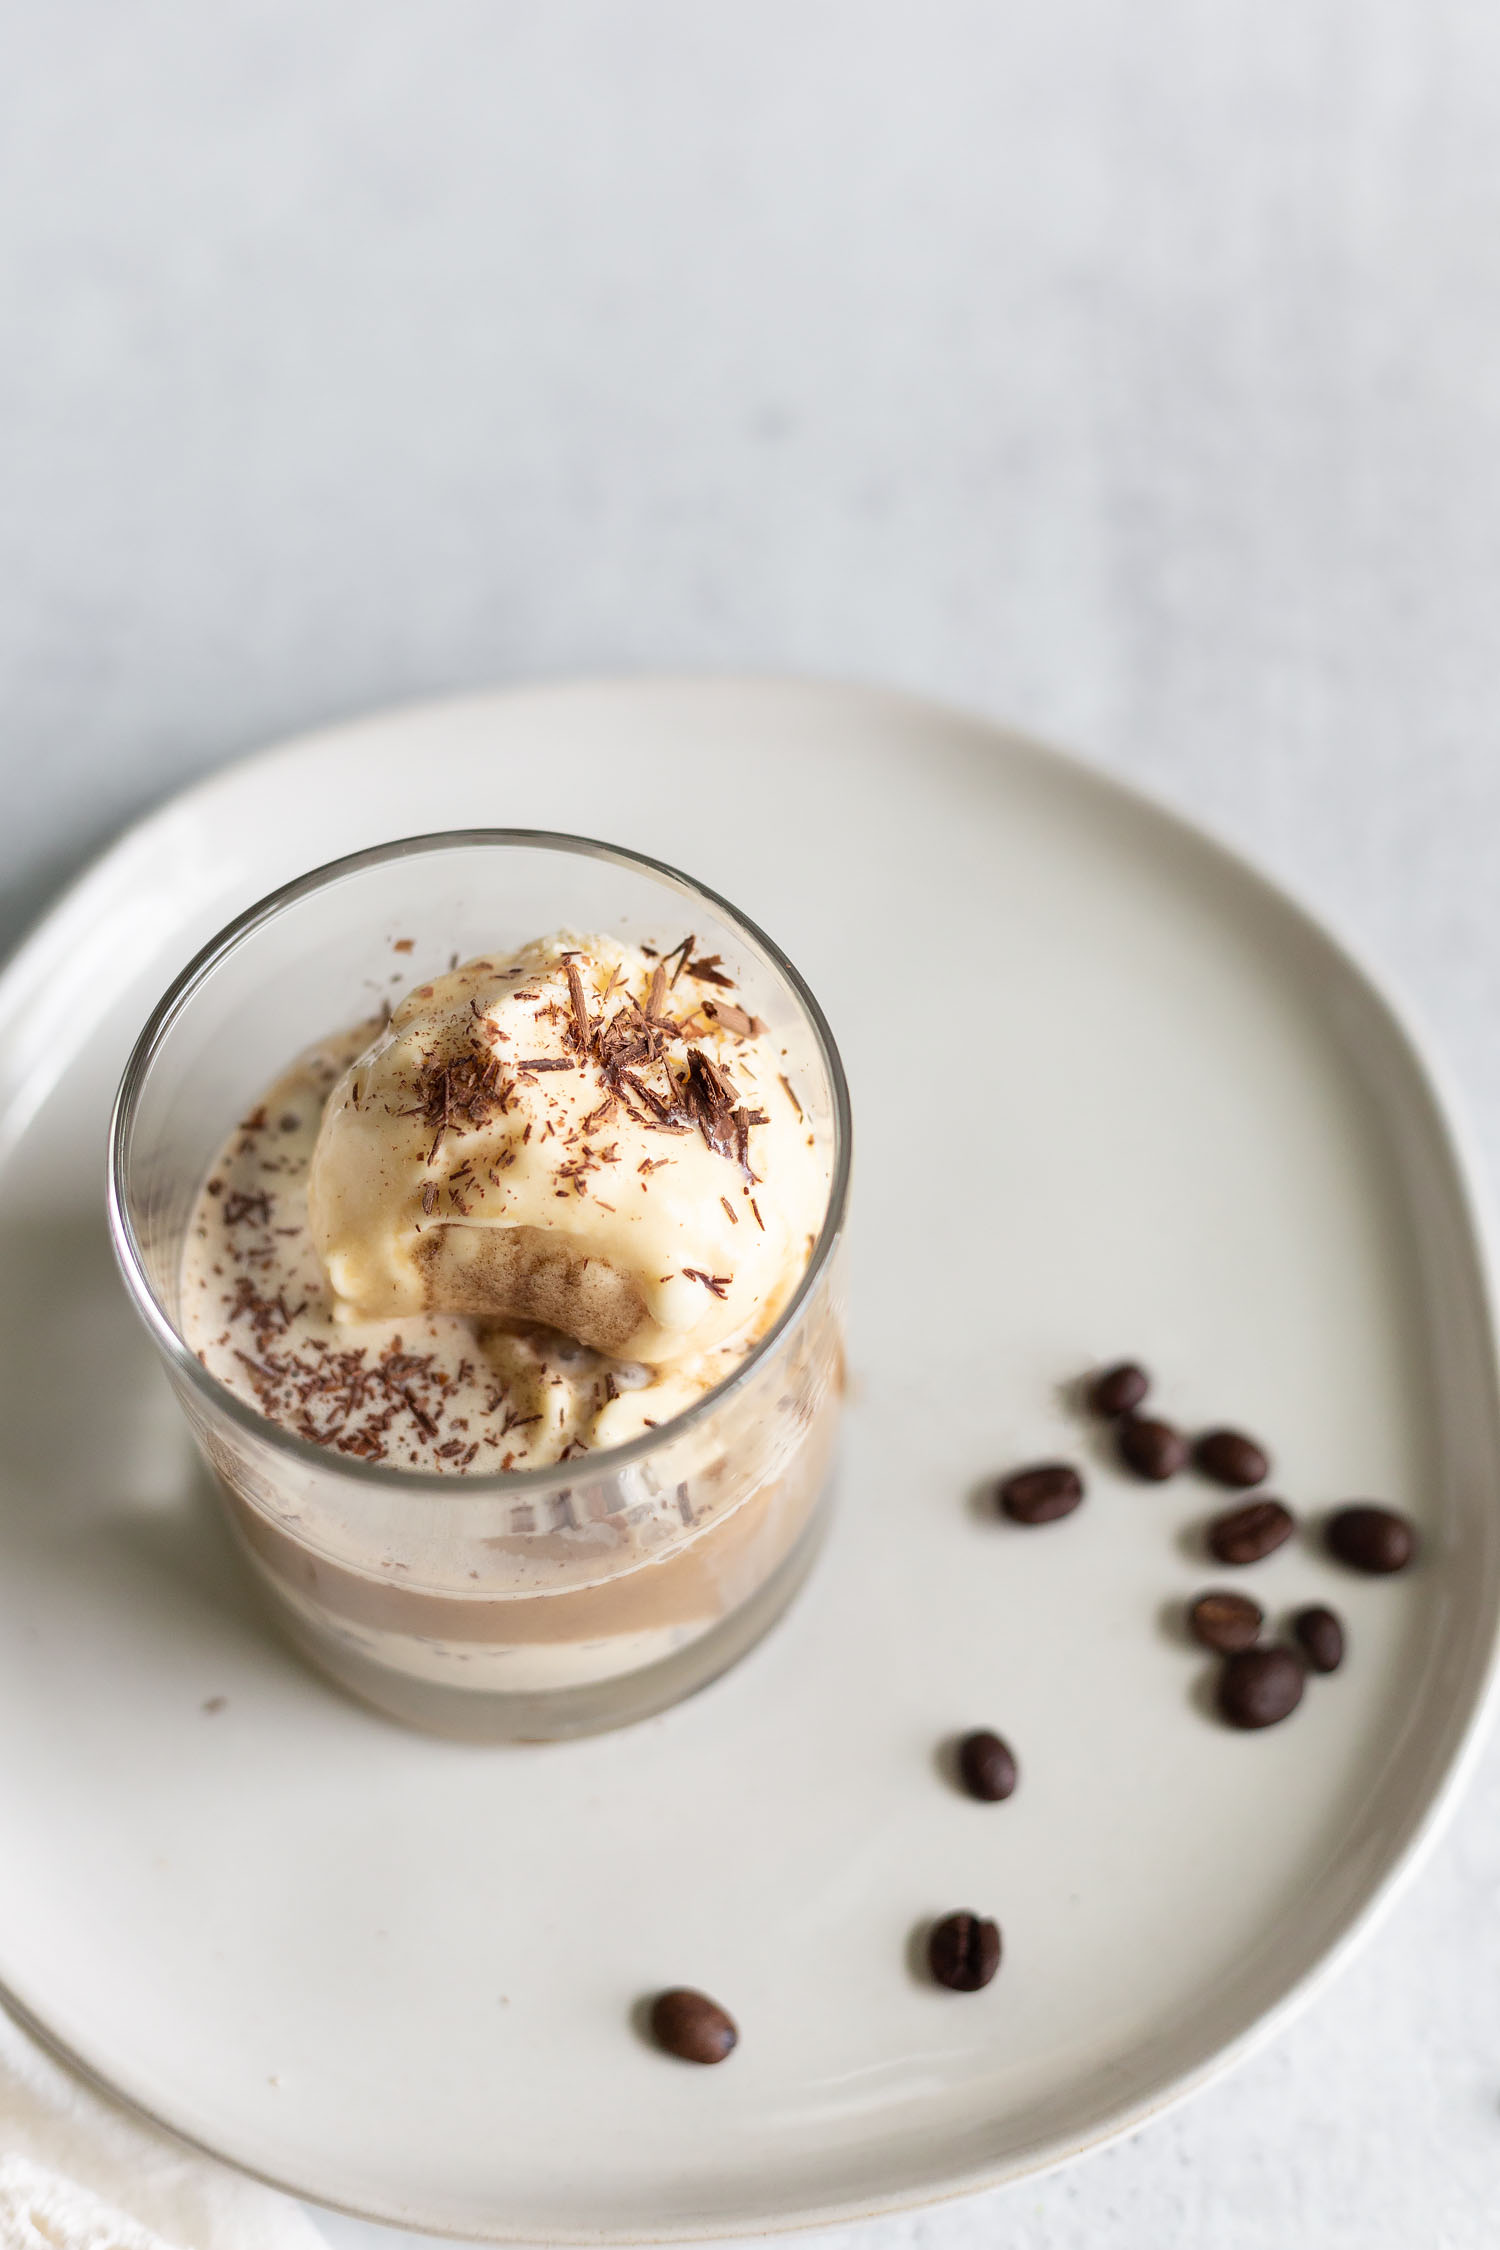 Italian affogato with coffee and ice cream topped with chocolate shavings